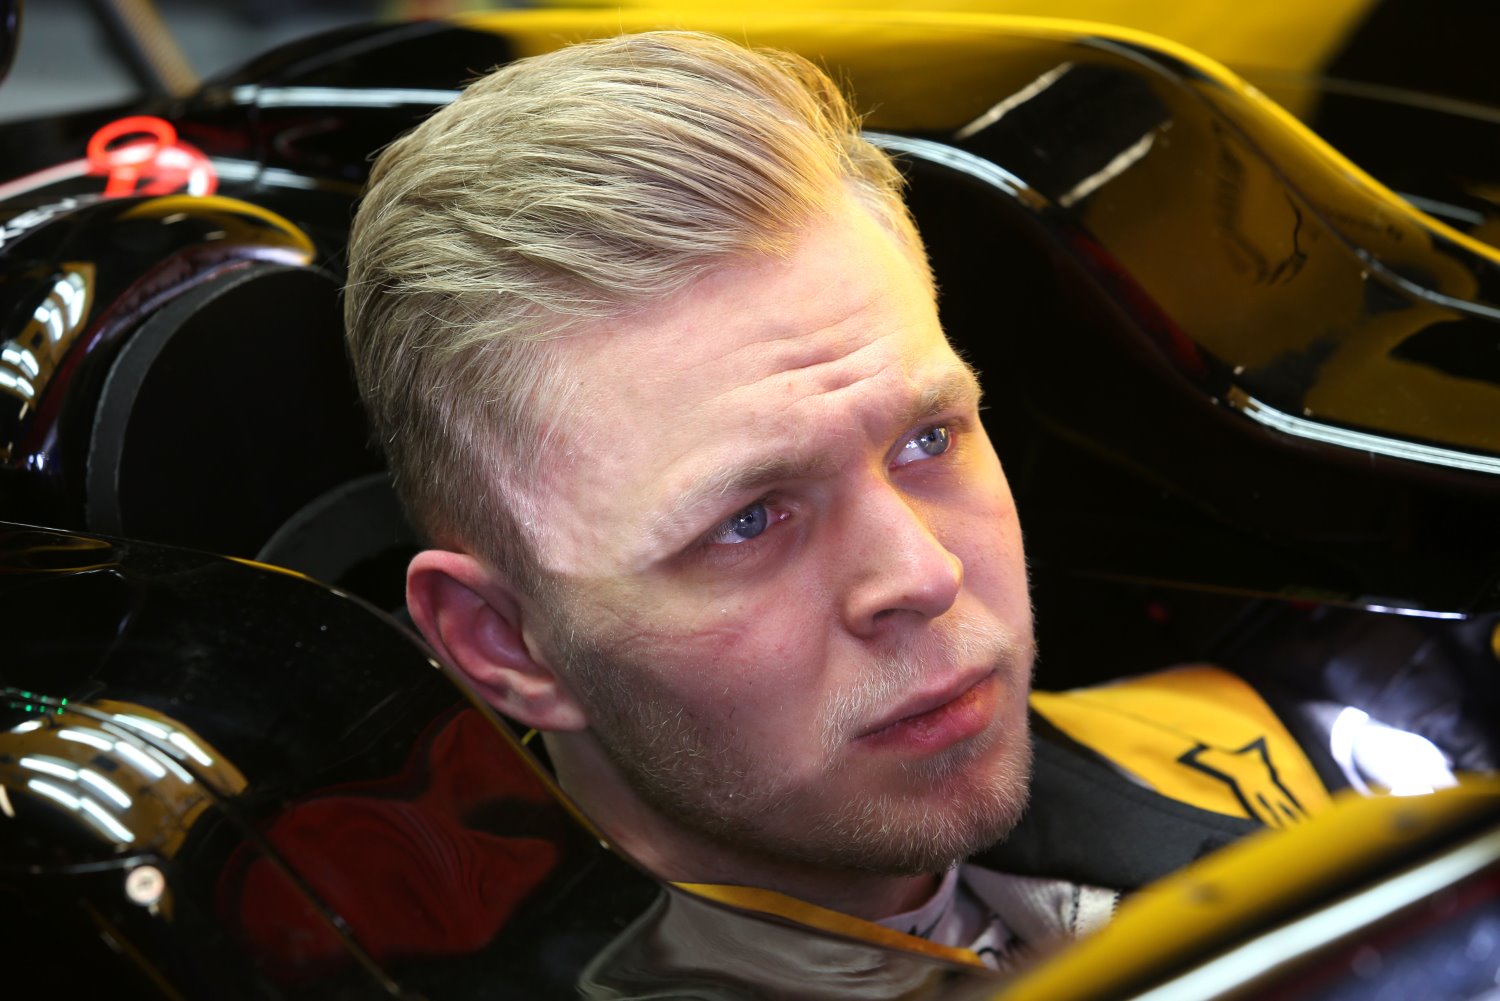 Kevin Magnussen's check was big enough for Haas, not Renault or McLaren